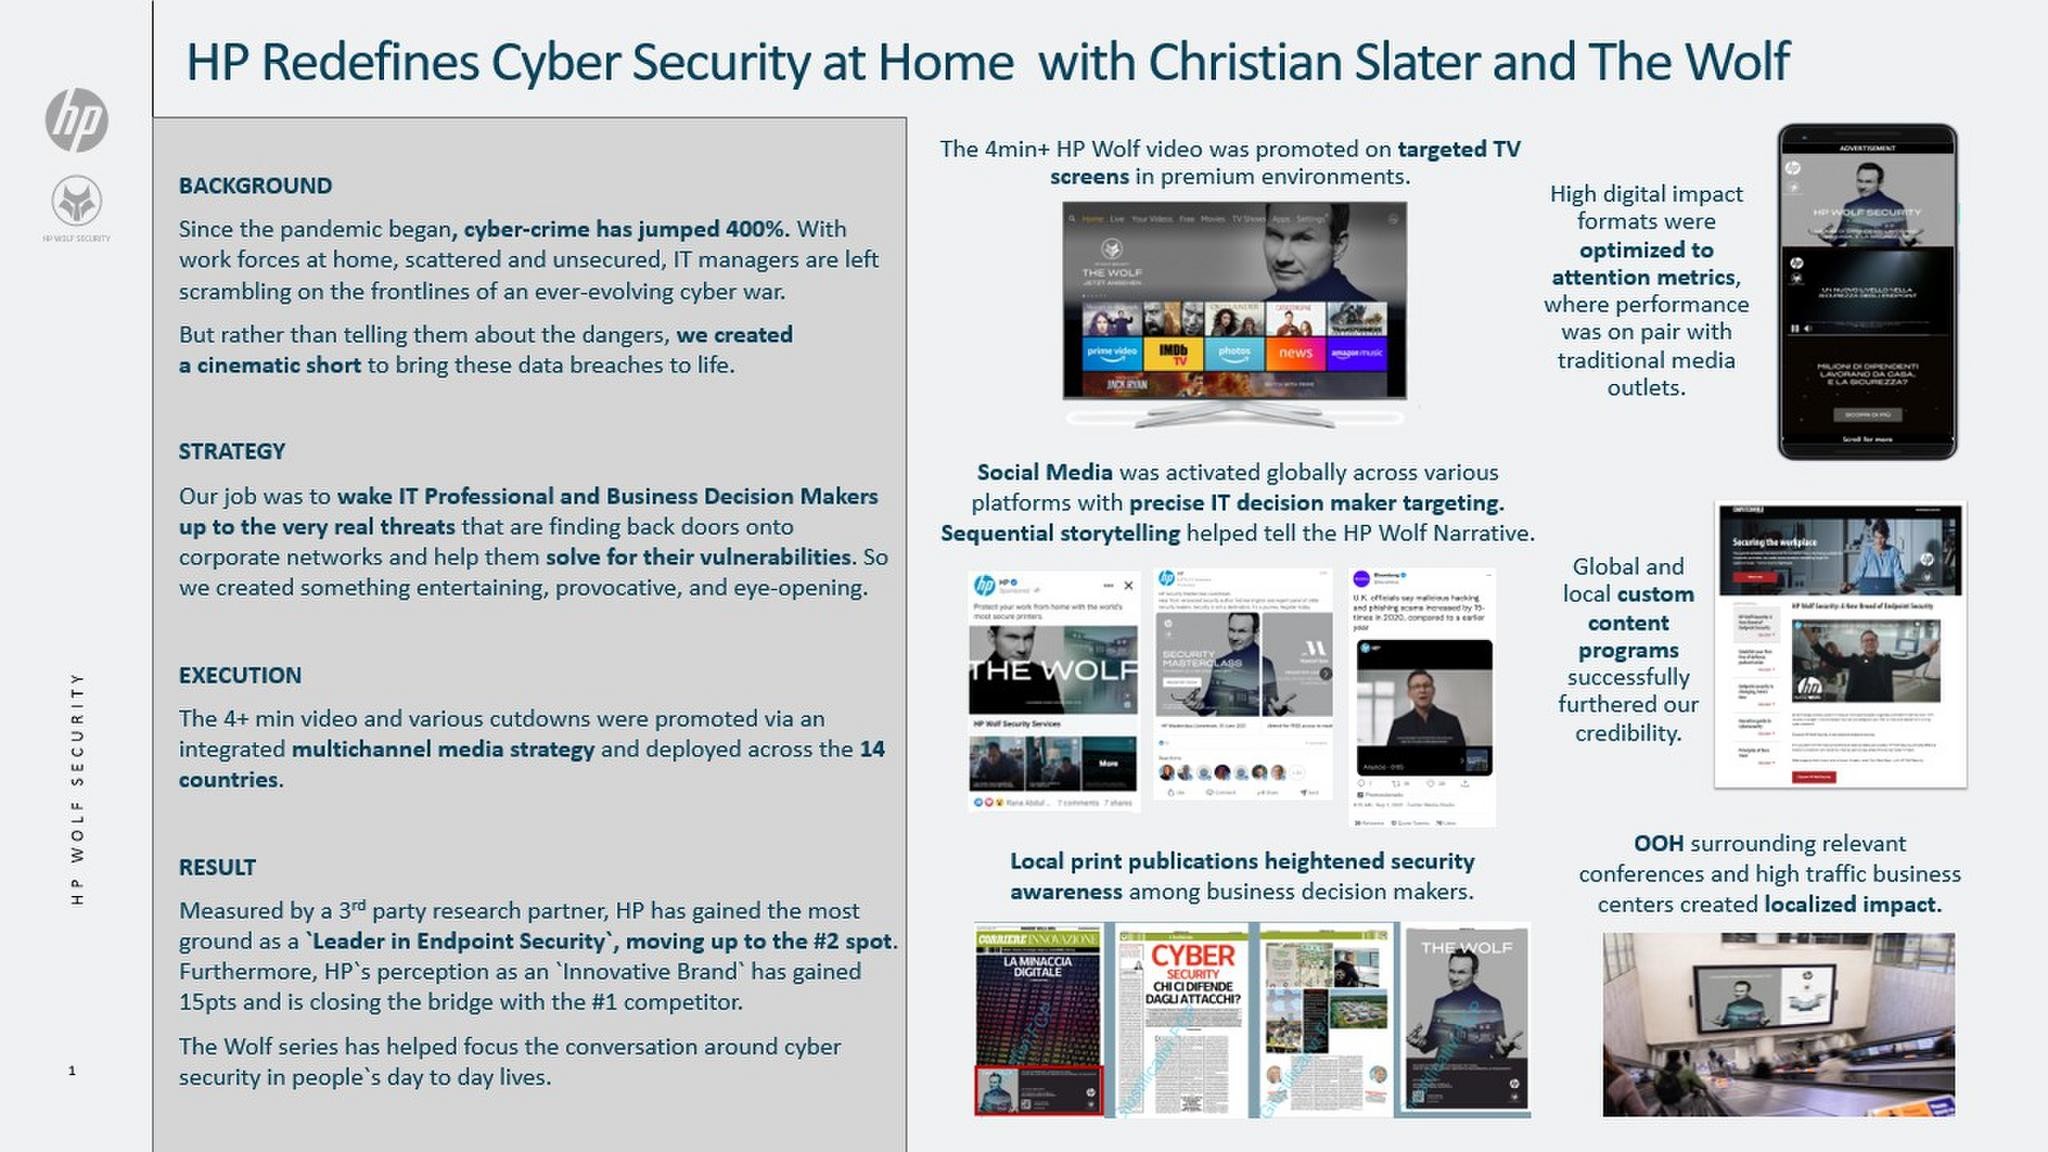 HP Redefines Cyber Security at Home with Christian Slater and The Wolf